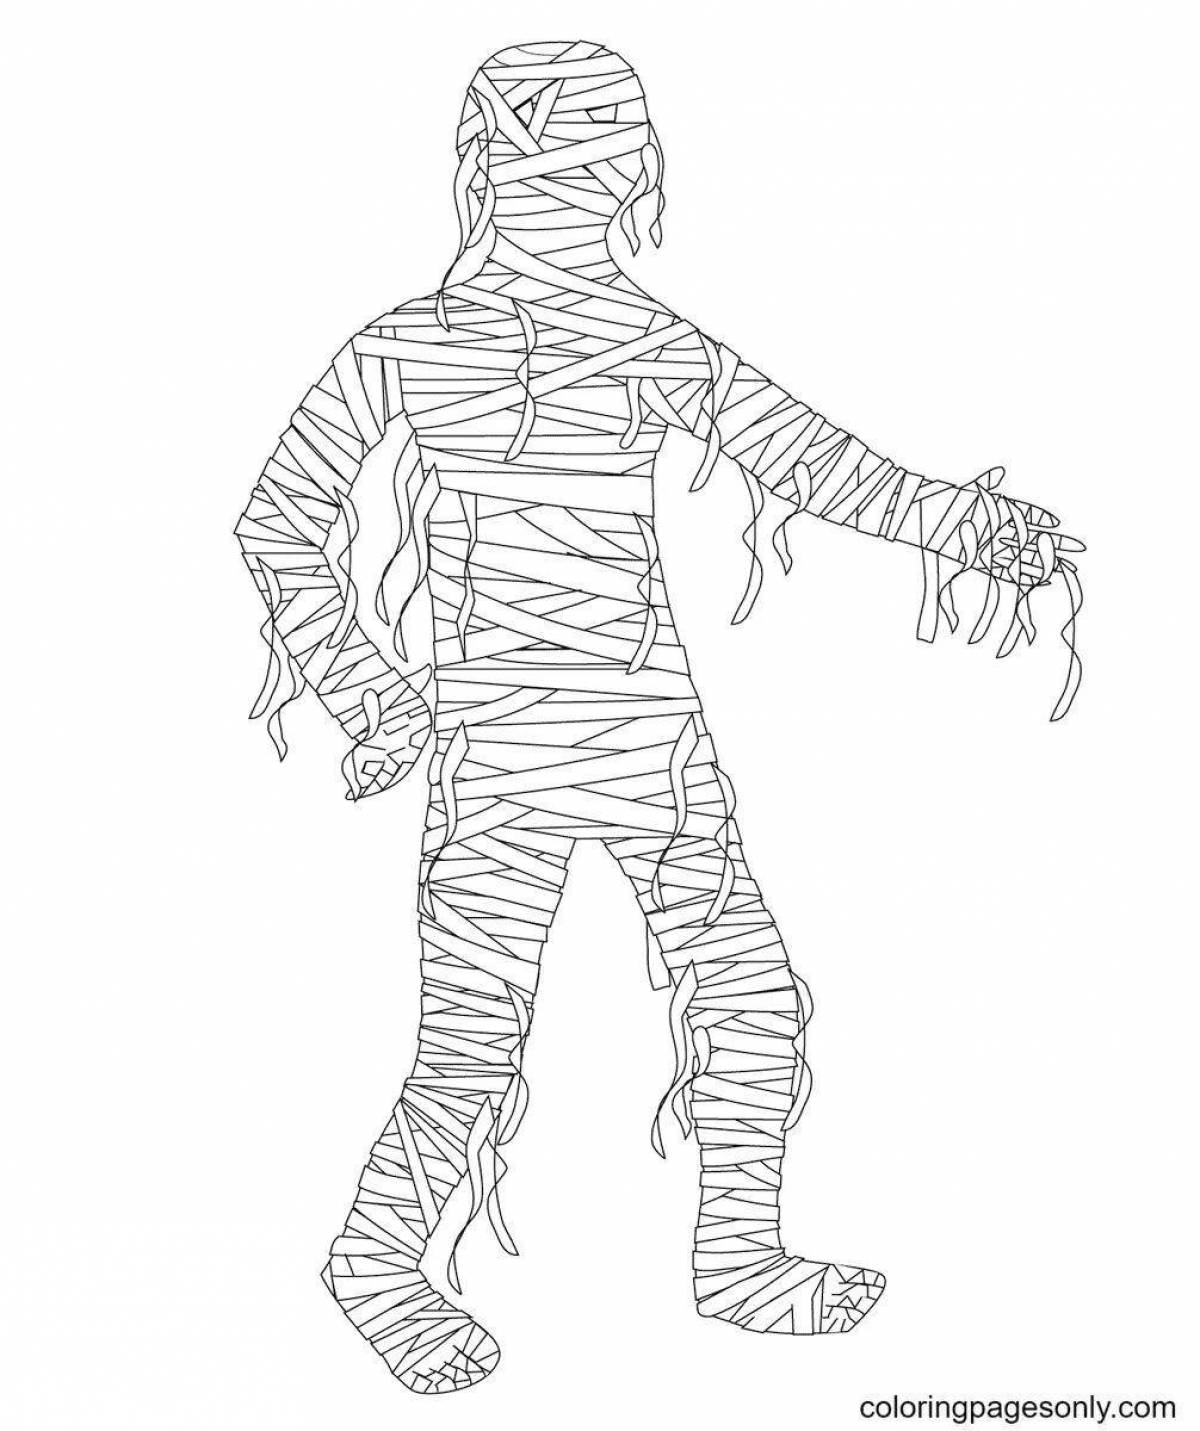 Horrible mummy coloring page